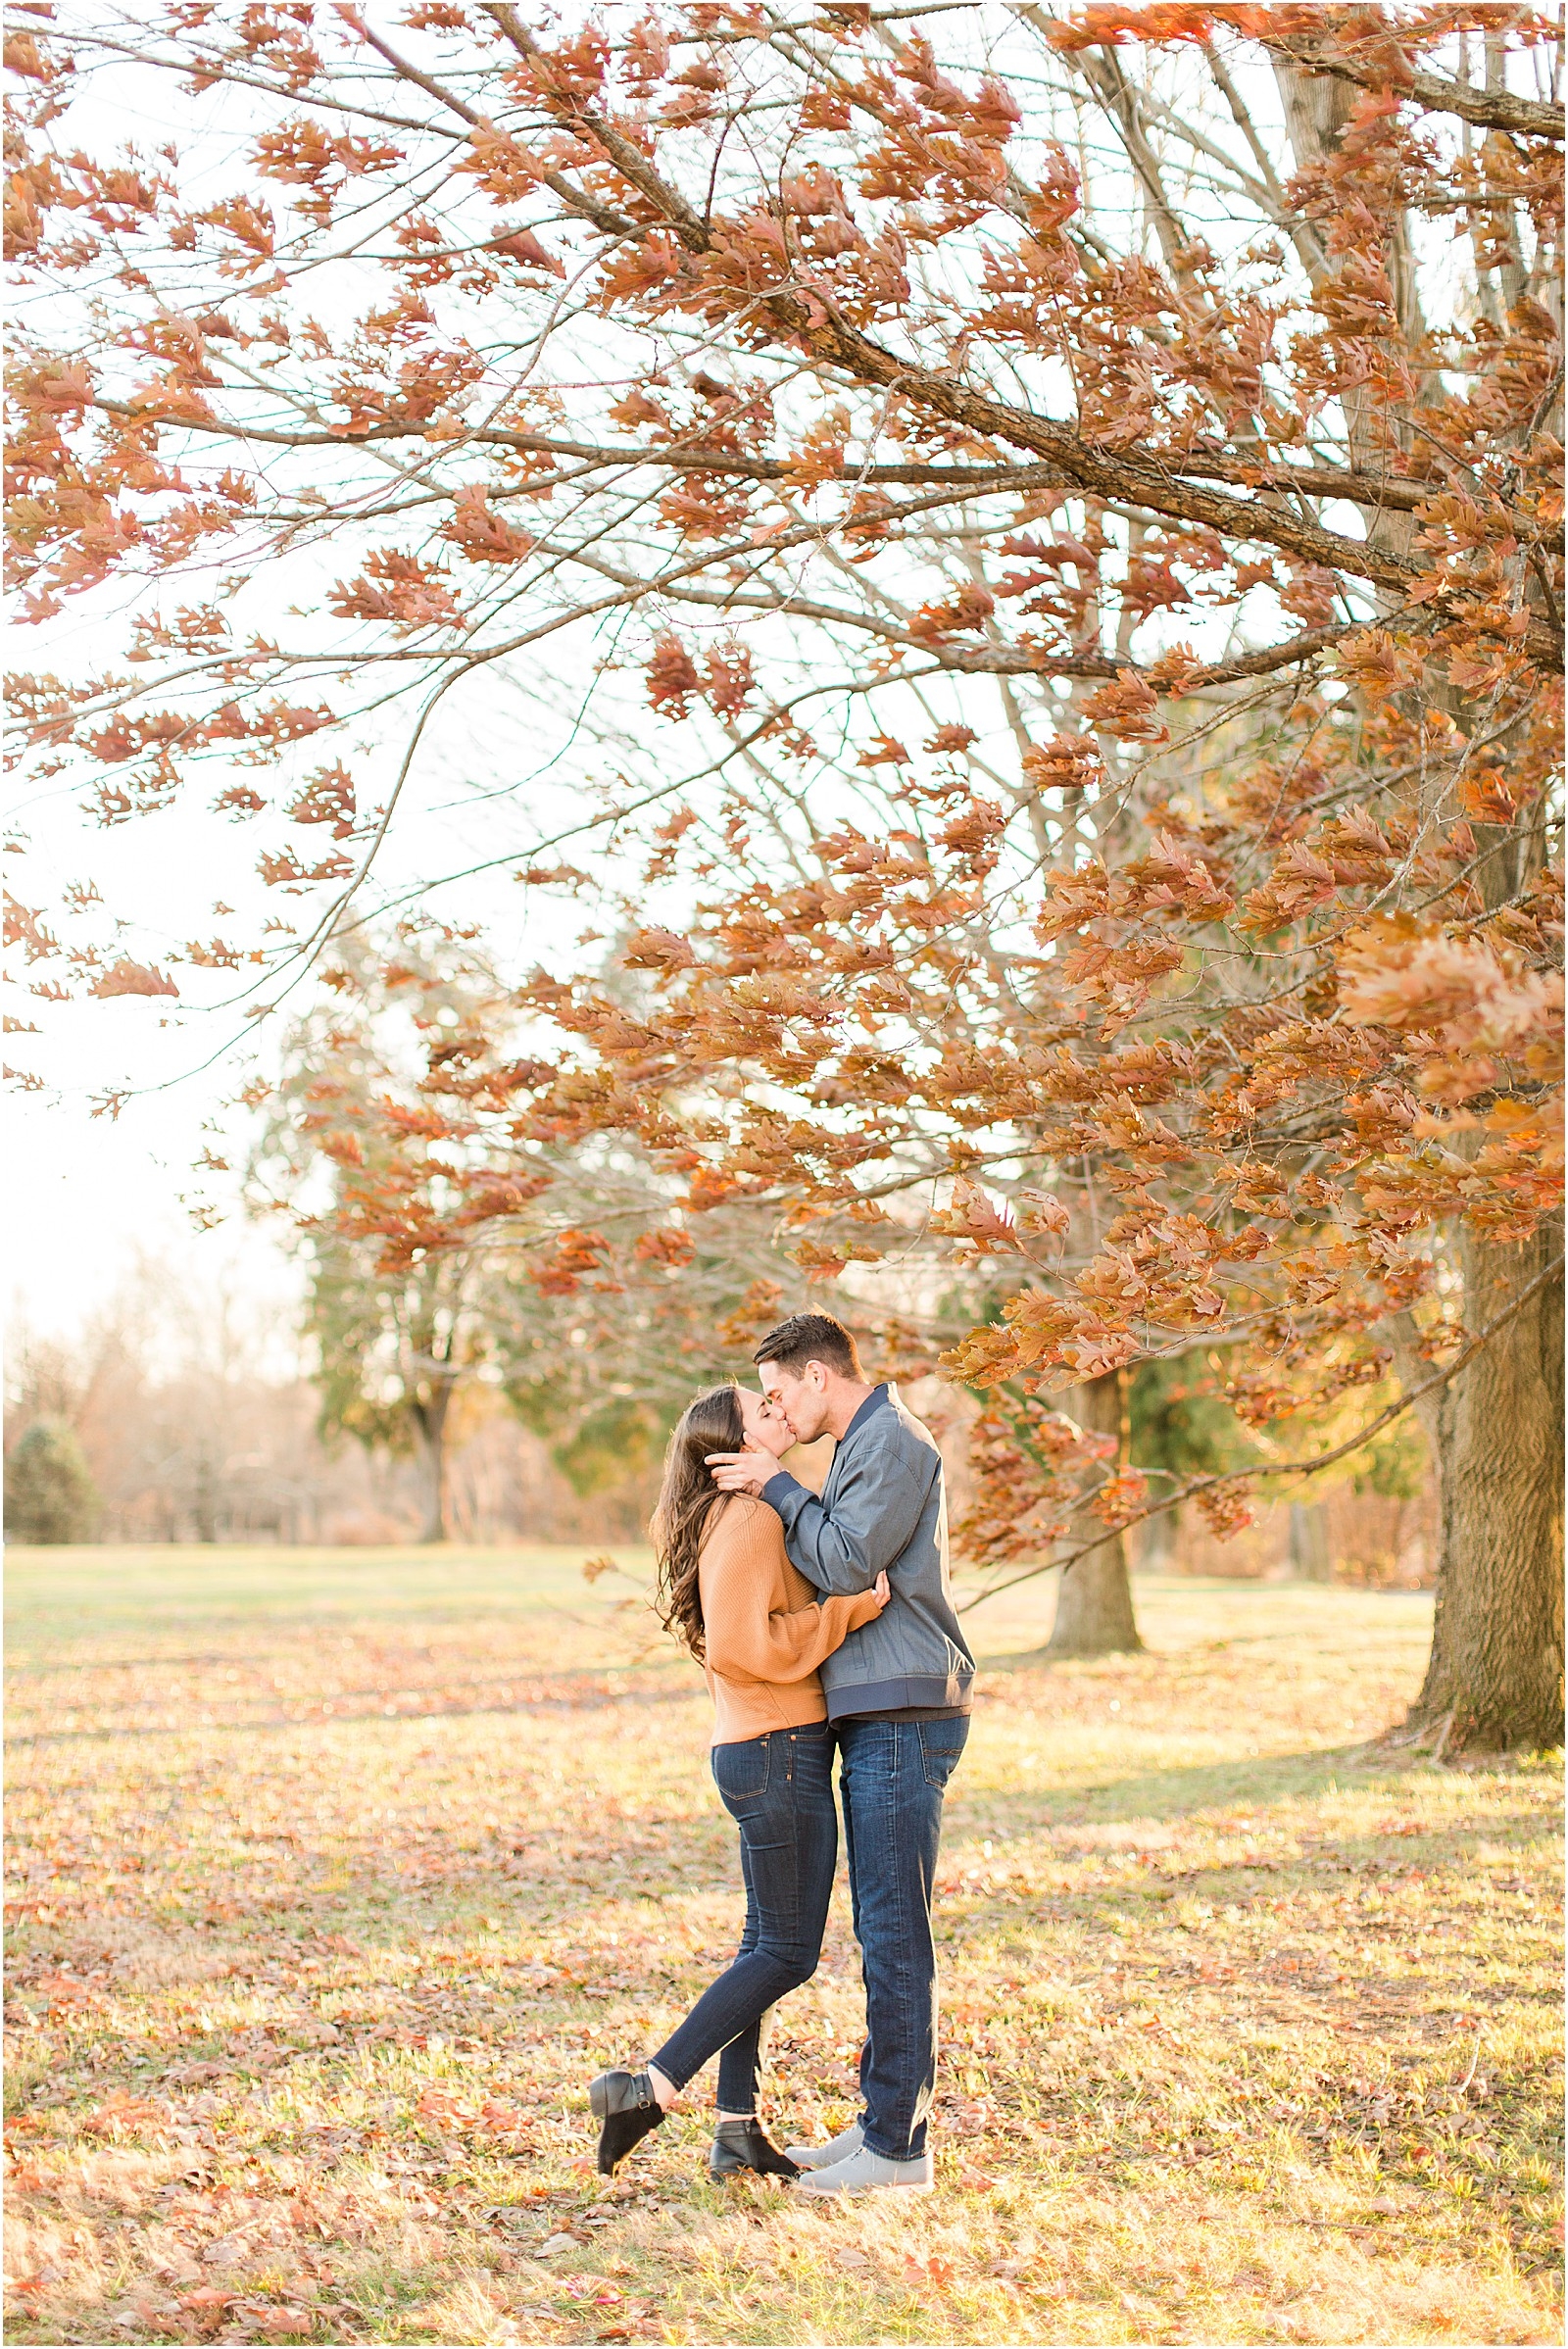 Kaley and Devon's fall Evansville Indiana engagement session. | #fallengagementsession #evansvilleindiana #evansvilleindianawedding | 0031.jpg